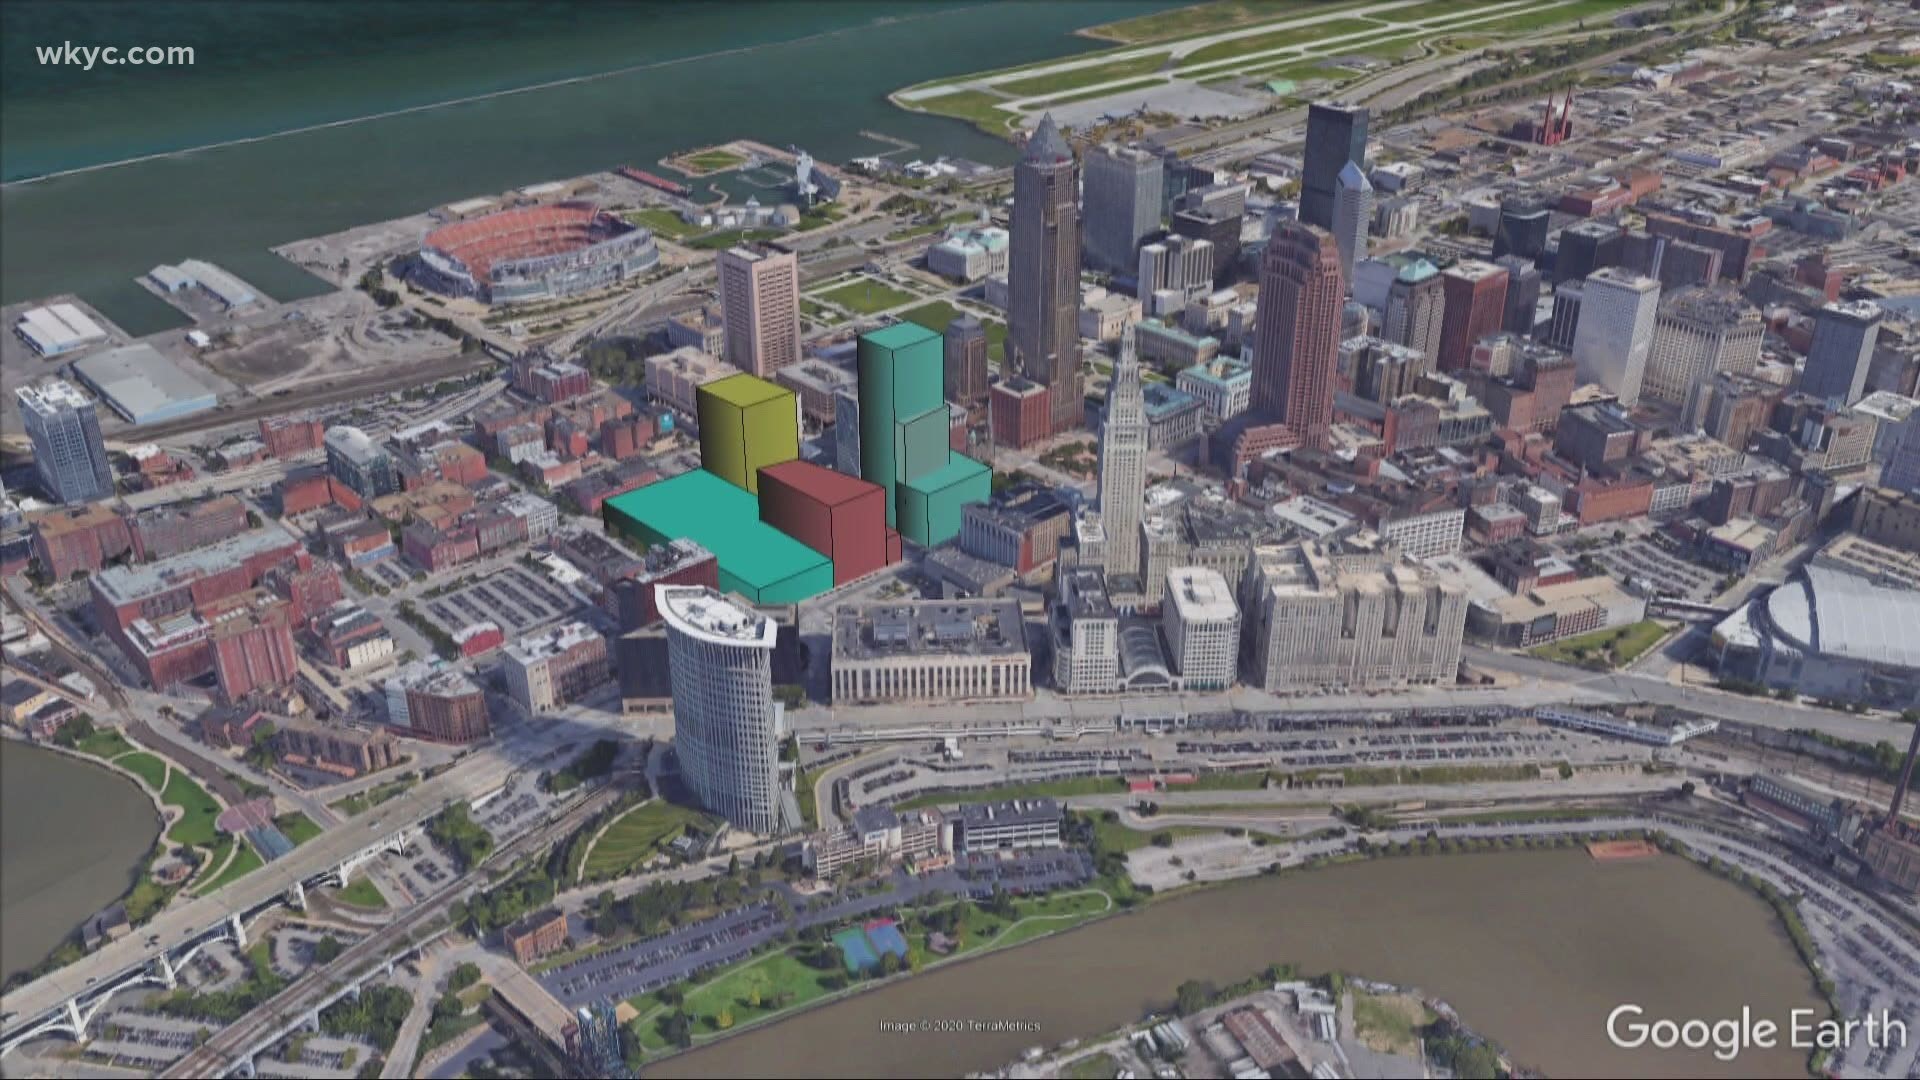 Sherwin-Williams revealed plans for the company’s new global headquarters in downtown Cleveland.